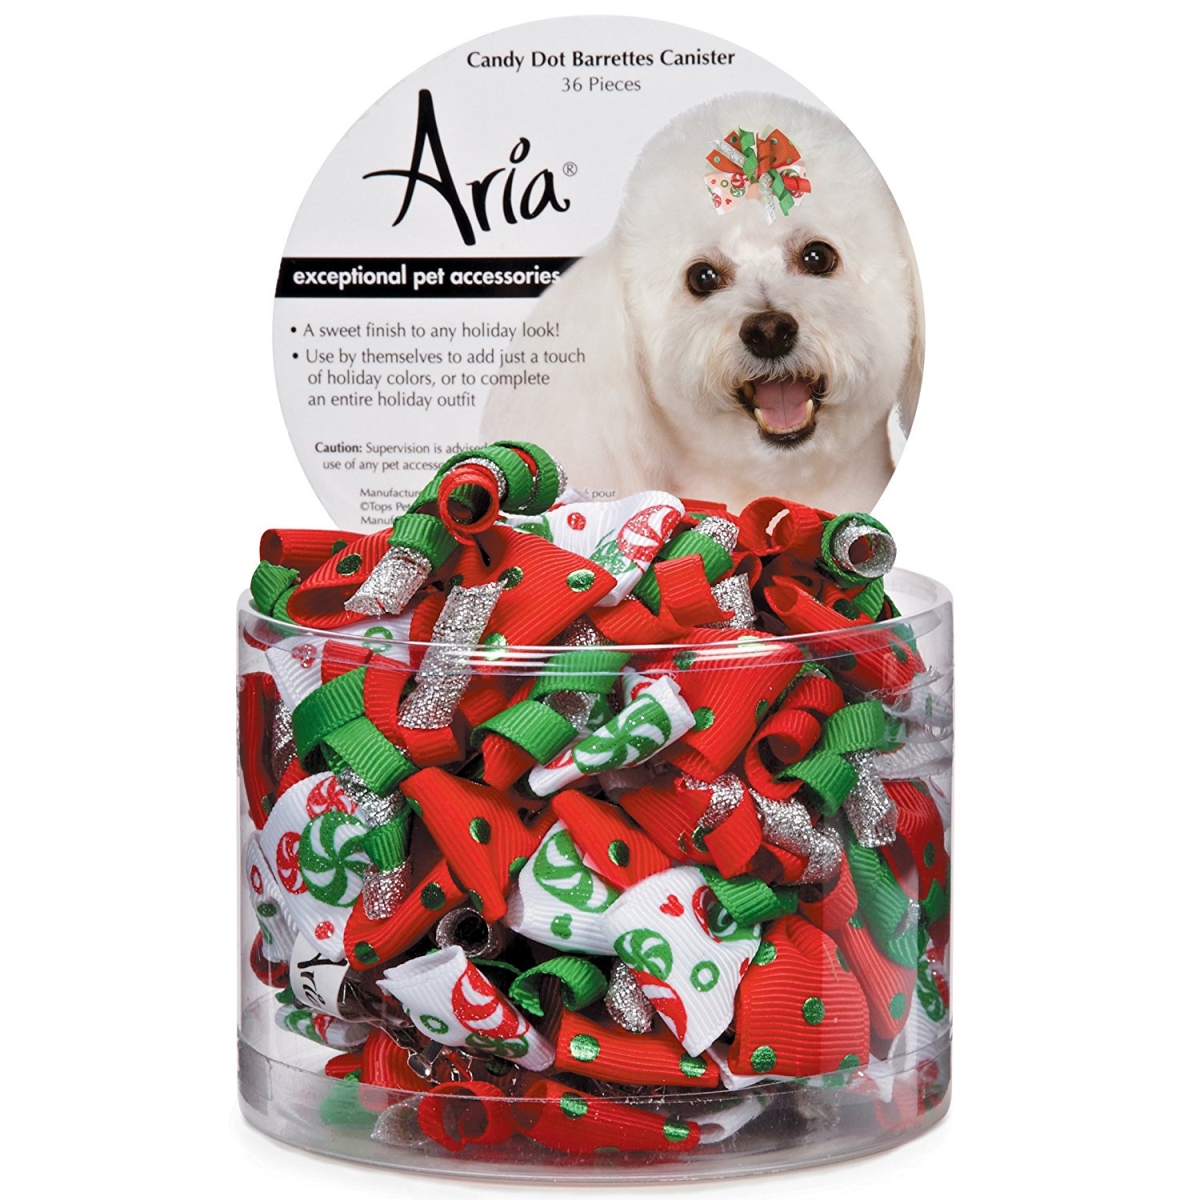 Aria Candy Dot Barrette Canister, 36 Piece